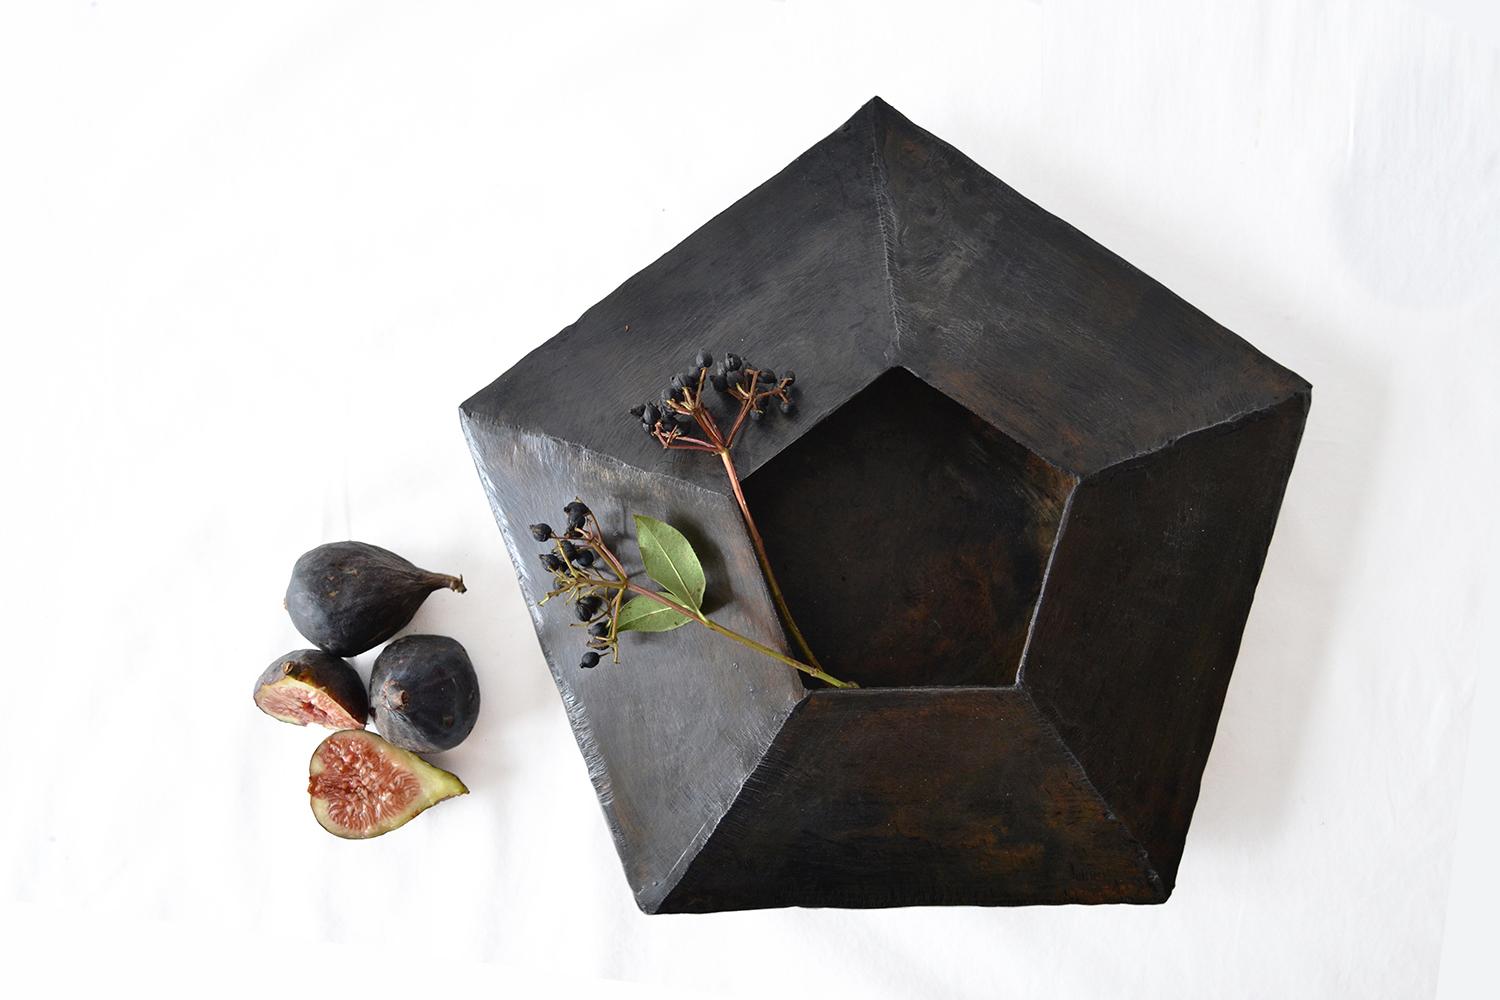 Vessel No. 5
J.M. Szymanski
d. 2017
Blackened and waxed iron

Mathematically designed and hand-wrought, this vessel uses 10-facets to help form this unique object that adds depth and design function to any space it is incorporated in.

Our products